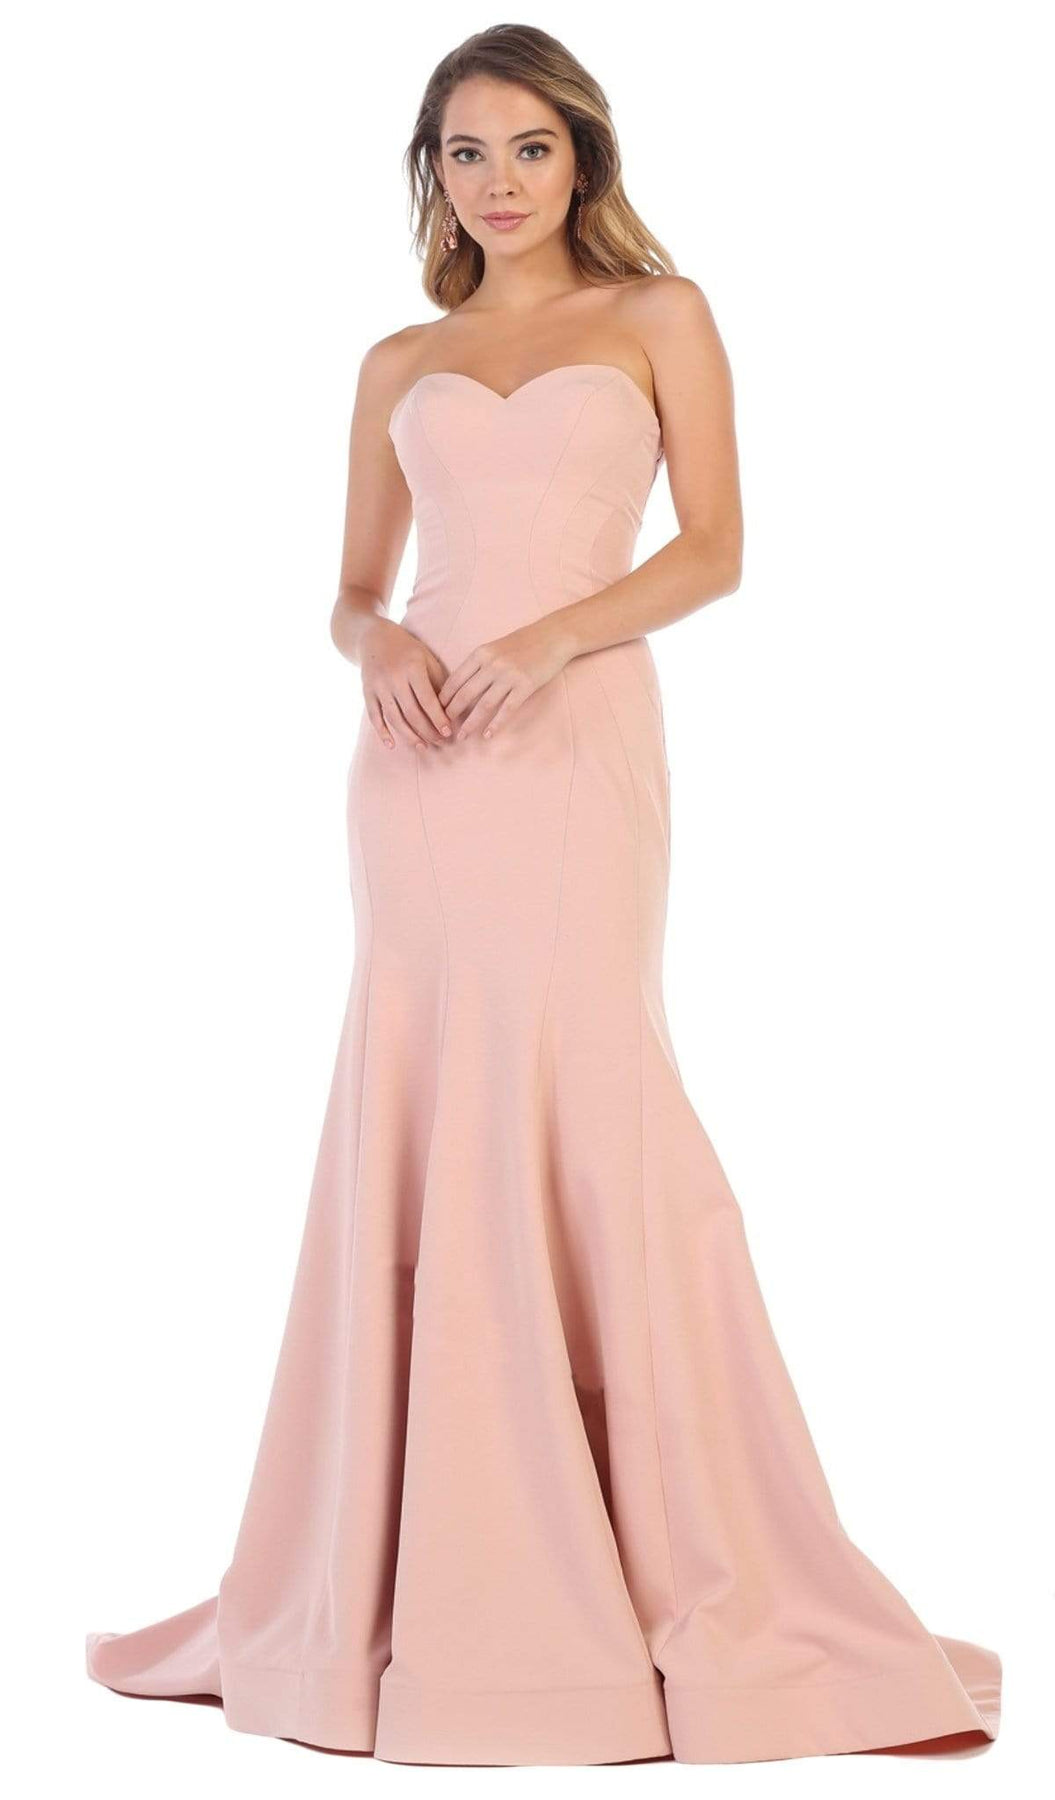 May Queen - RQ7703 Strapless Sweetheart Trumpet Evening Dress Bridesmaid Dresses 4 / Dusty-Rose